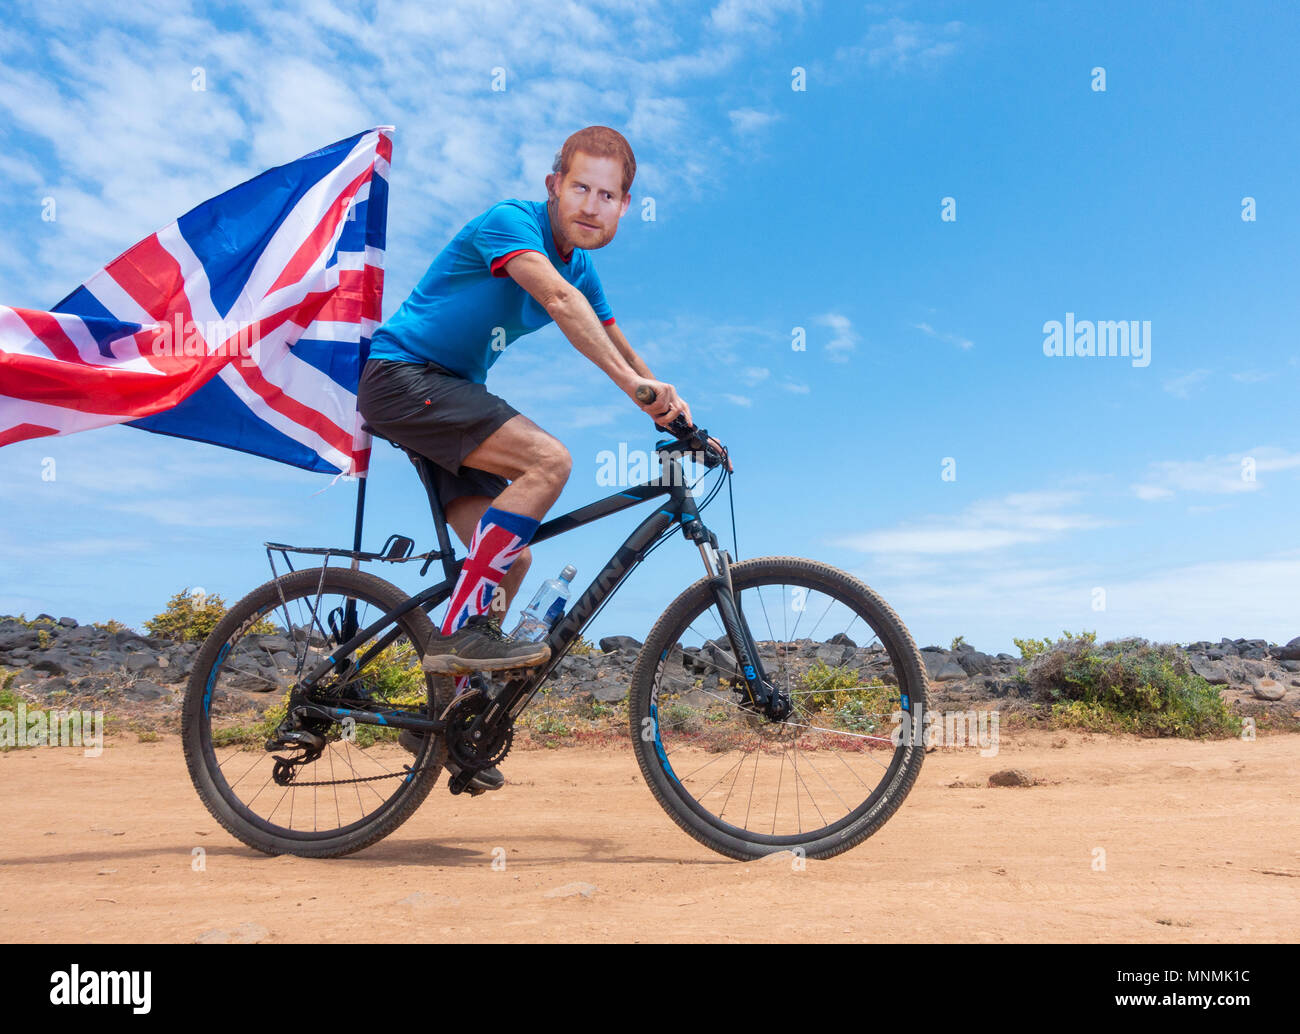 Mountain biker with union jack flag and socks wearing Harry face mask to celebrate the Royal wedding of Harry and Meghan Stock Photo